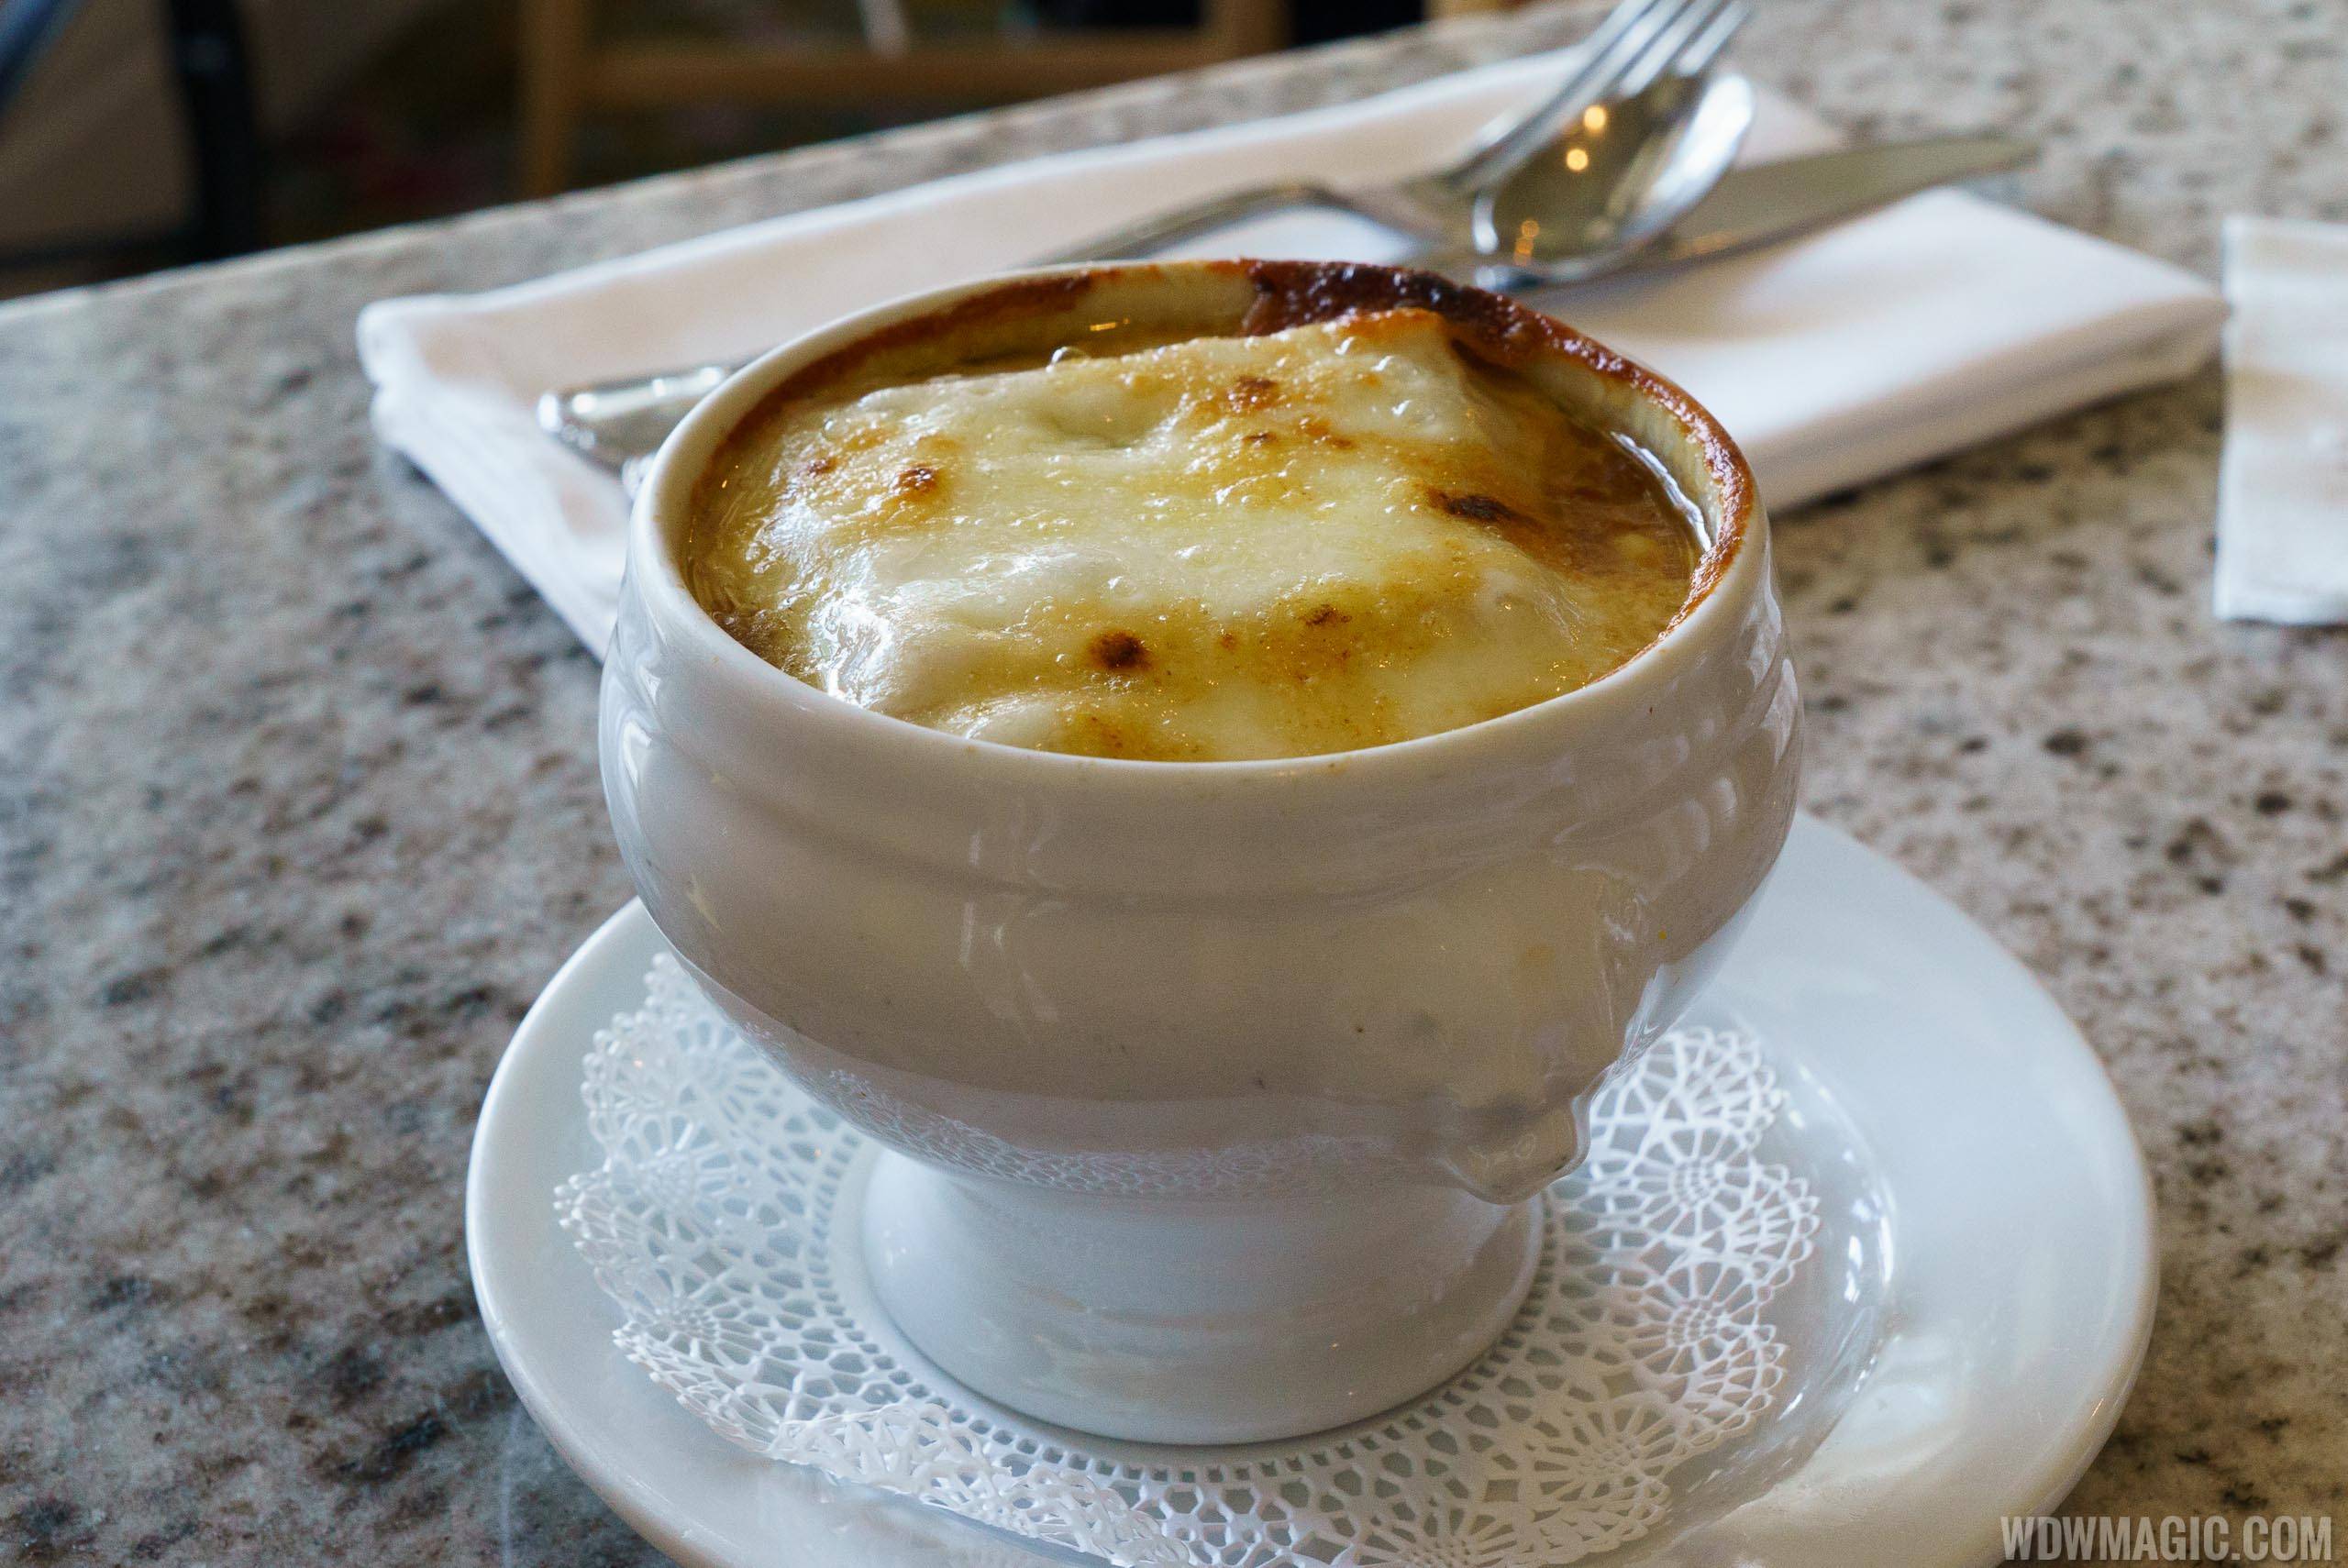 Carmelized Onion Soup Gratinée at the Grand Foridian Cafe